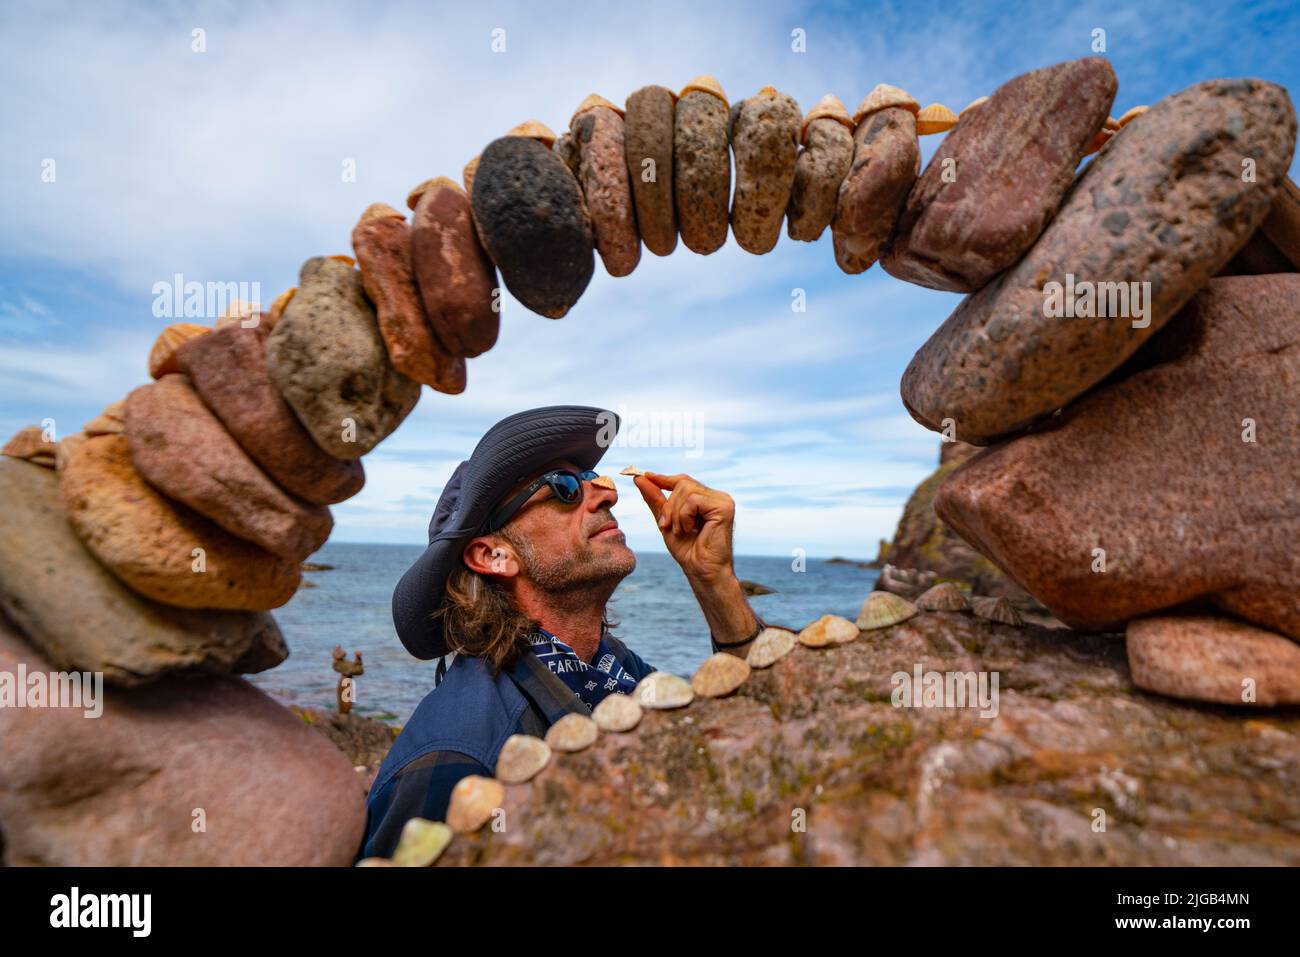 Dunbar, Scotland, UK. 9 July 2022. Day one of the 11th Stone Stacking Championships held at Eye Cave Beach in Dunbar in East Lothian. . Competitors are shown during the arch building competition. Pic; Pedro Duran stacking seashells on his nose beside his stone arch. Iain Masterton/Alamy Live News Stock Photo